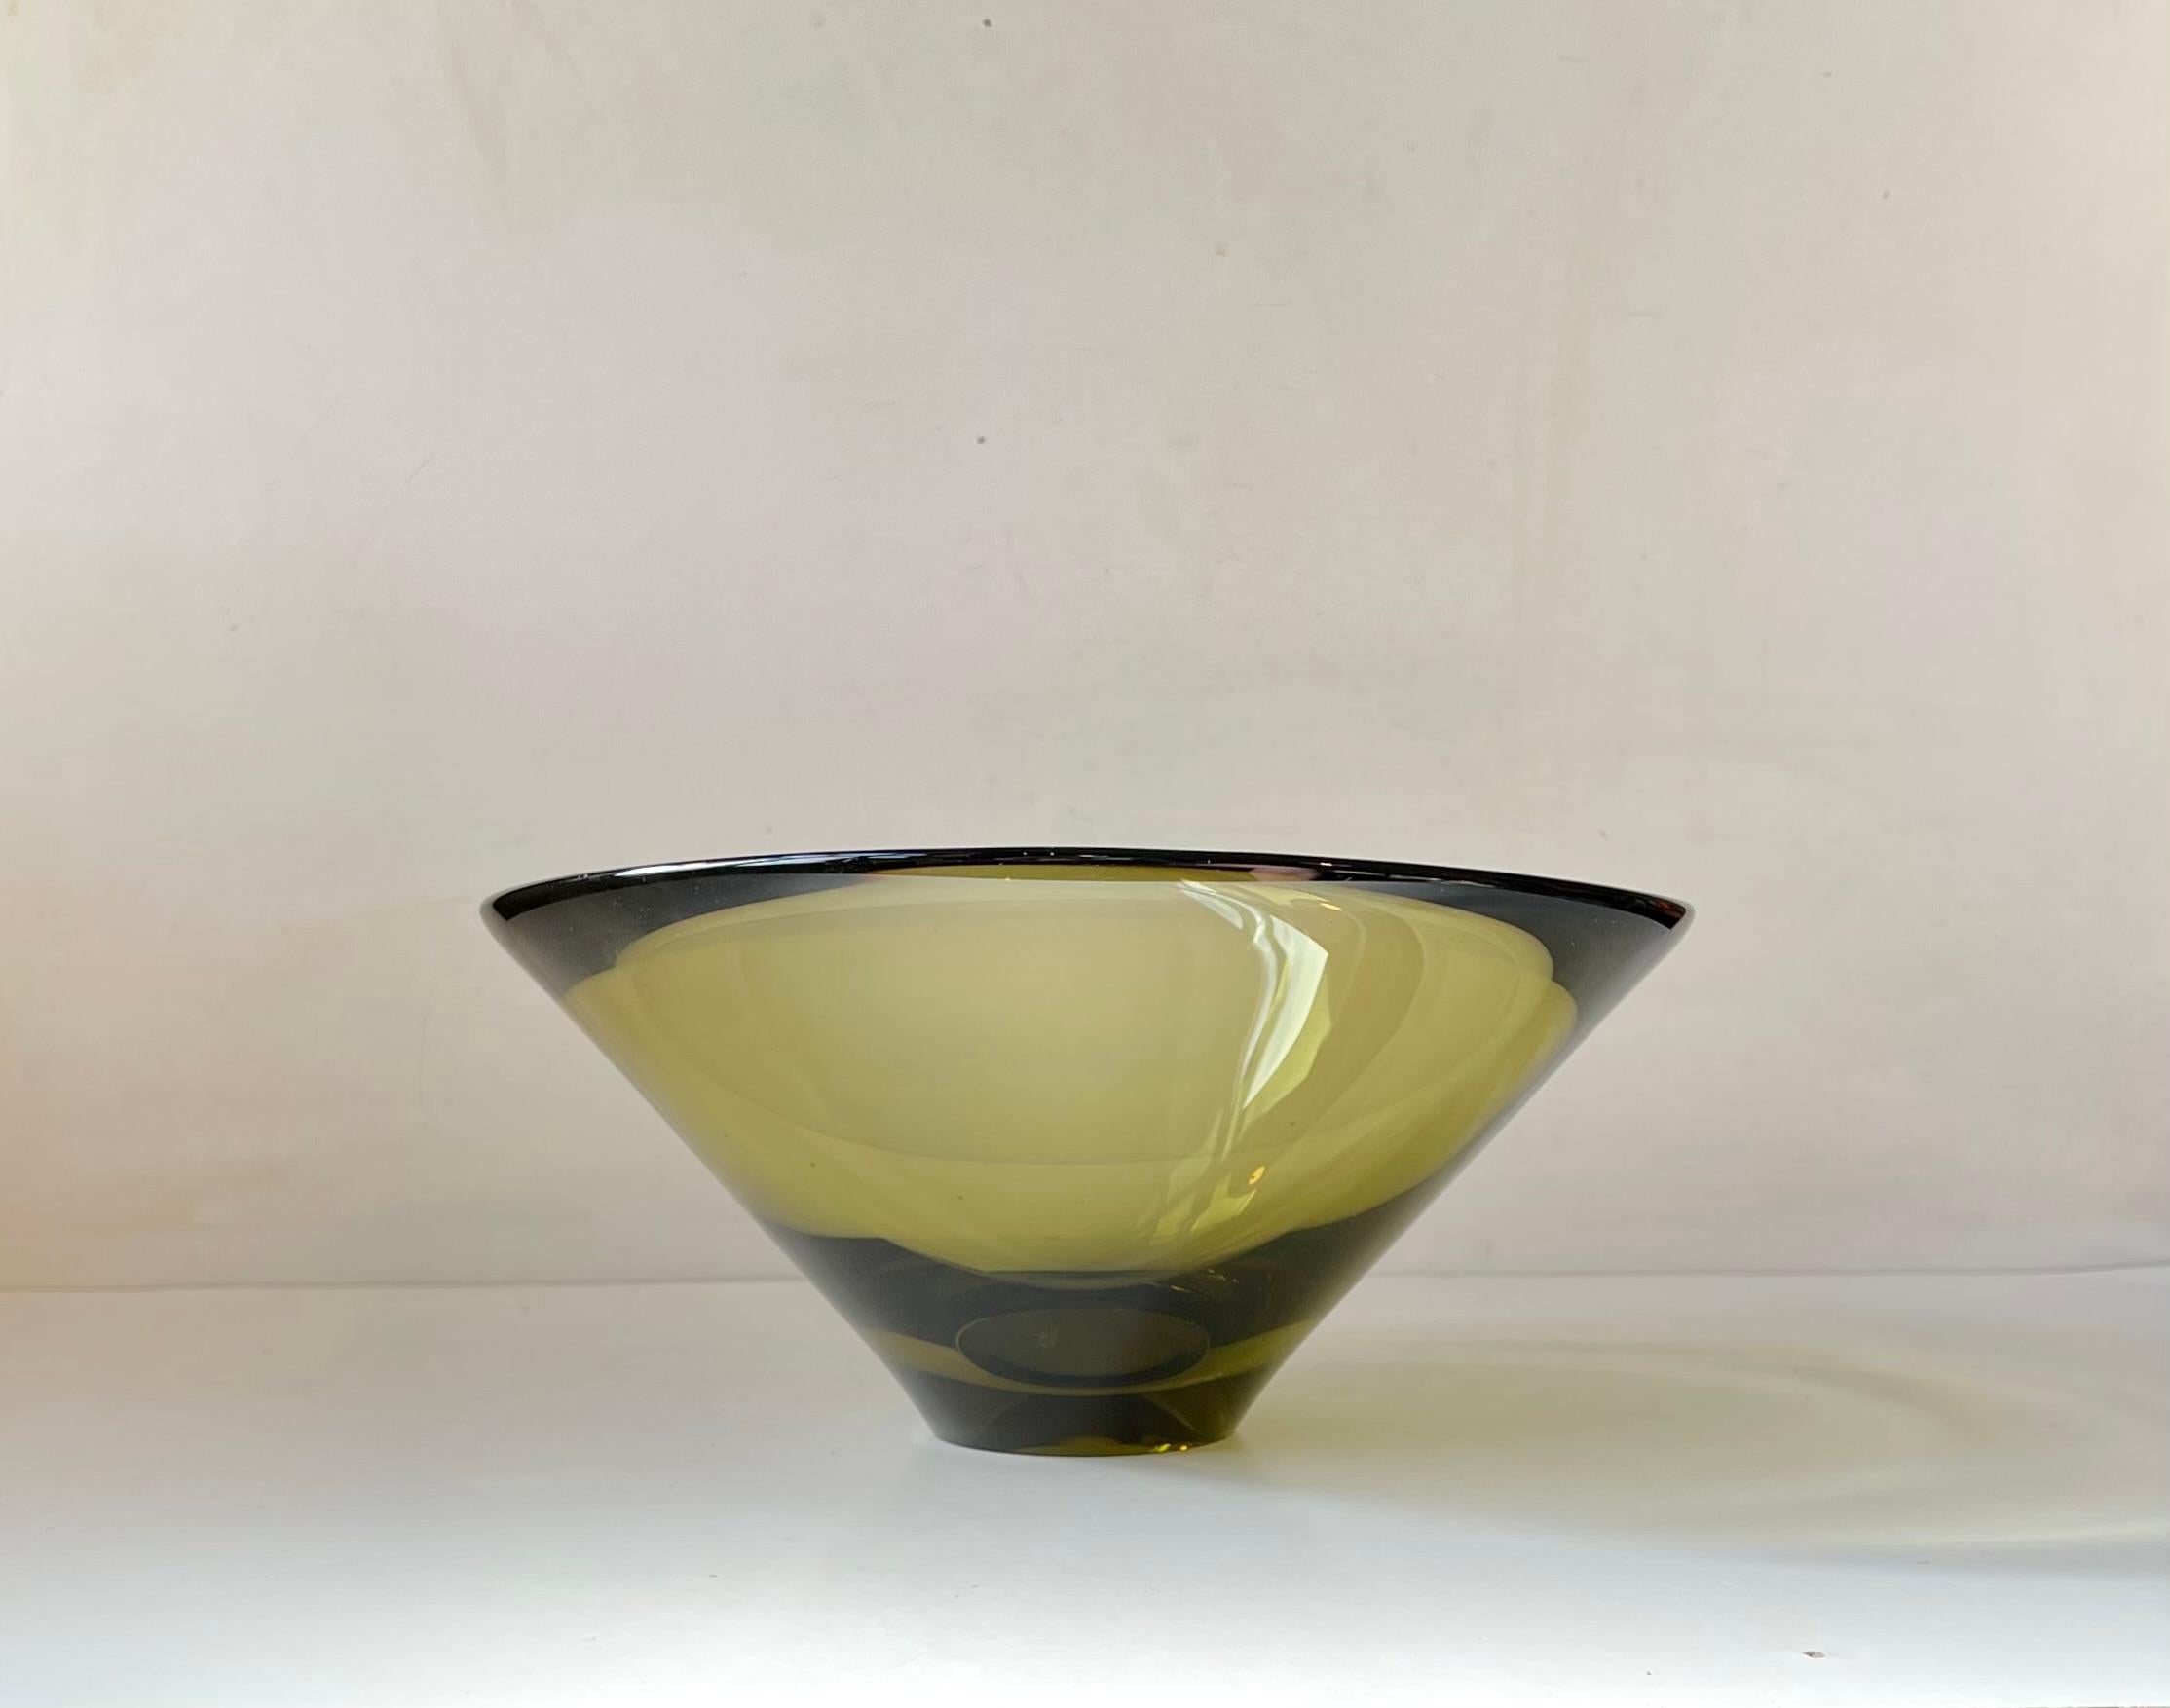 Titled 'Disko' this ultra rare hand-blown olive green glass bowl by Per Lütken was made in 1961. The name Disko has nothing to do with disco. In fact the name was inspired by the reflections of light Lütken experienced visiting Diskobugten/ Disko